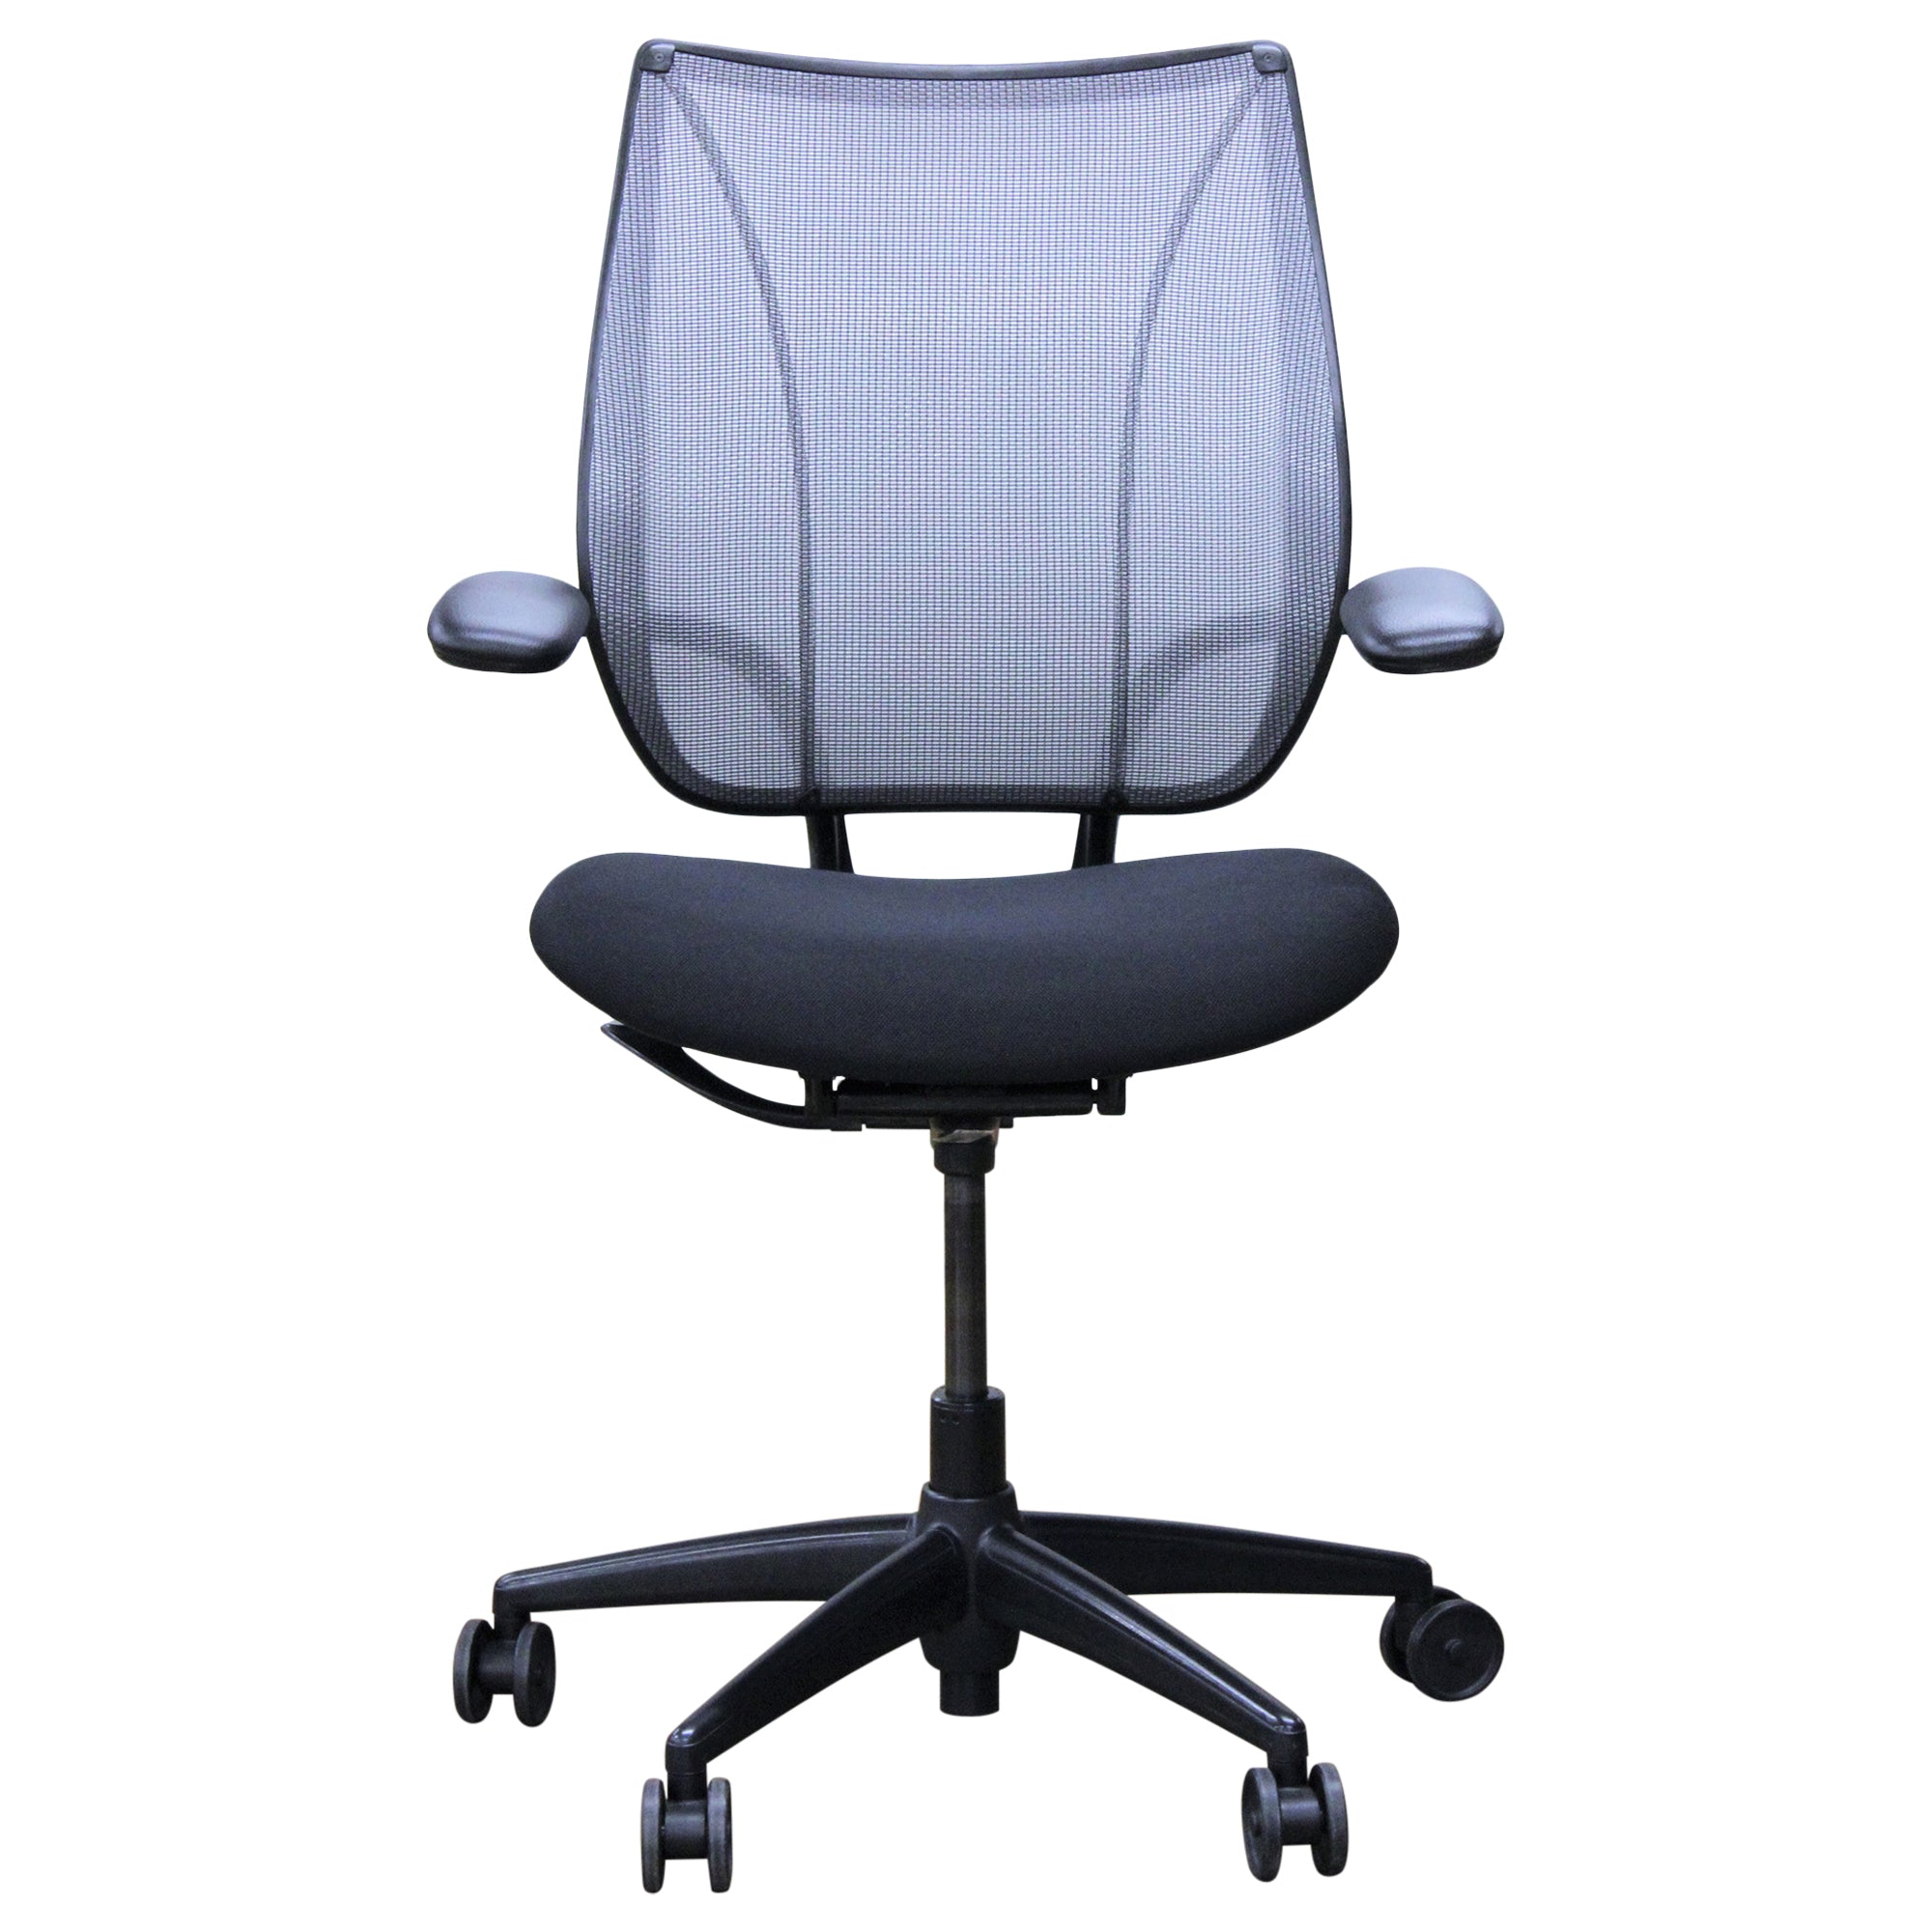 Humanscale Liberty Task Chair, Grey Mesh - Preowned